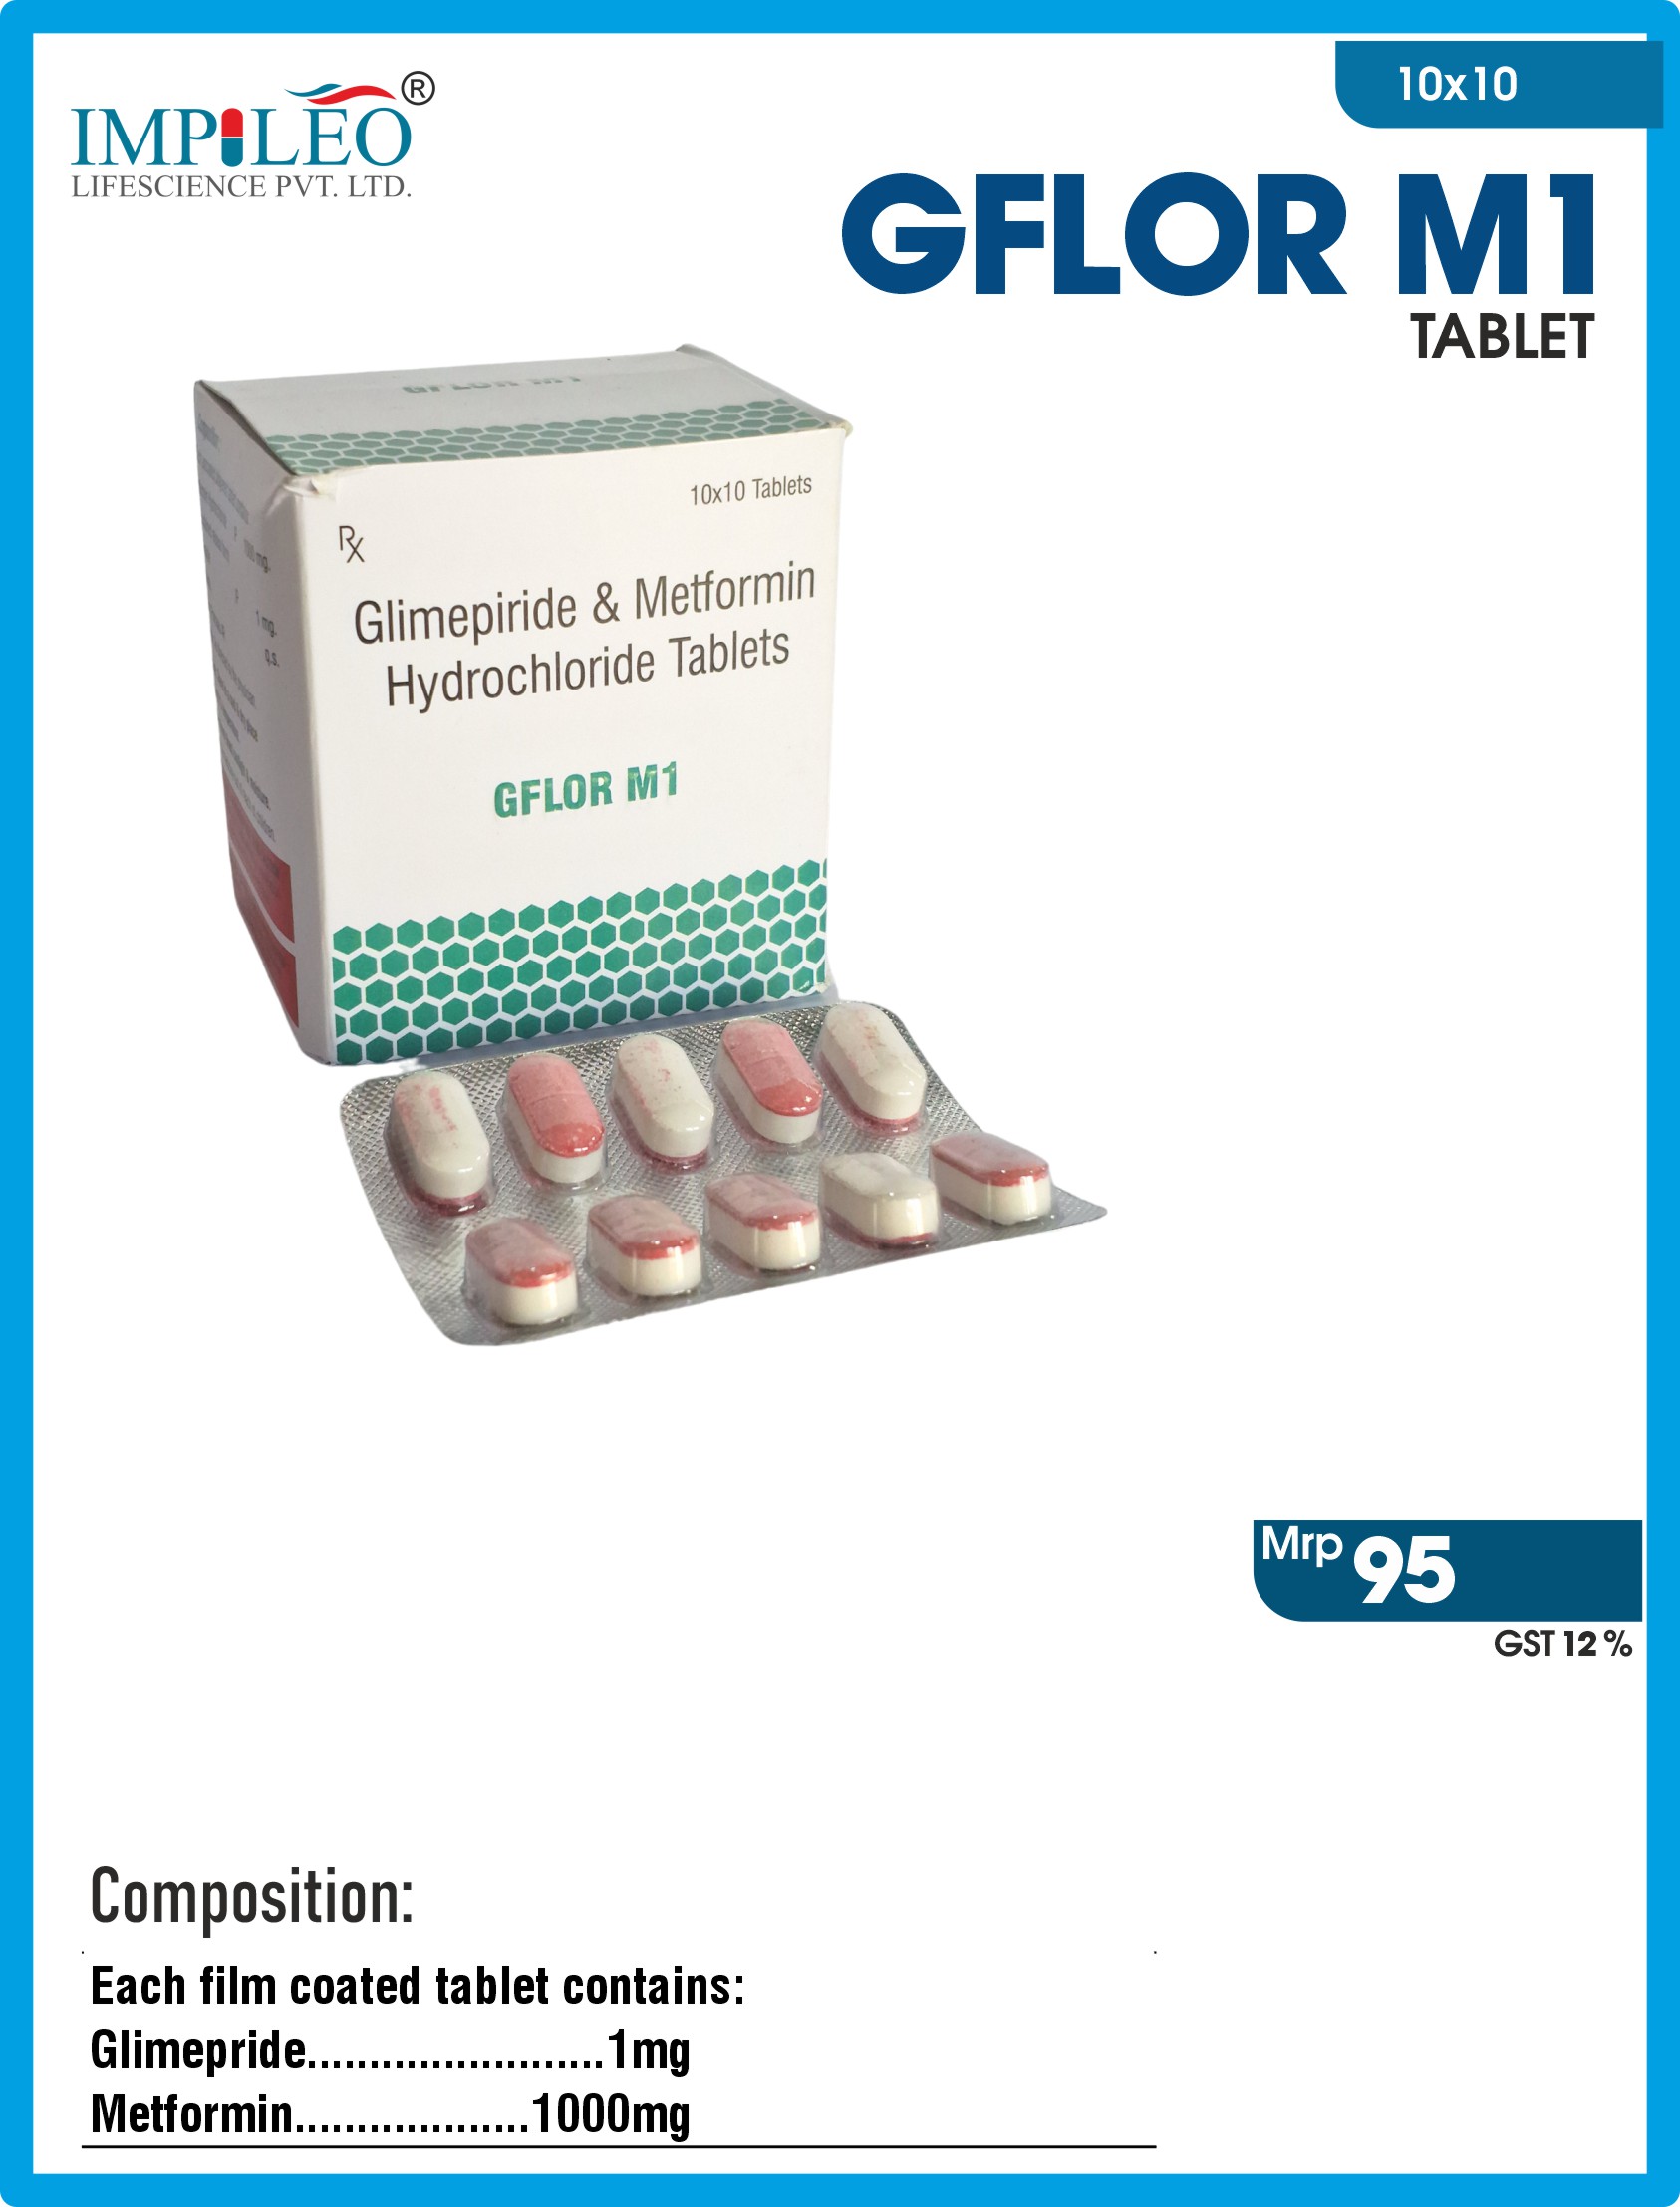 Reliable GFLOR M1 Tablet Supply : Trusted PCD Pharma Franchise in Chandigarh